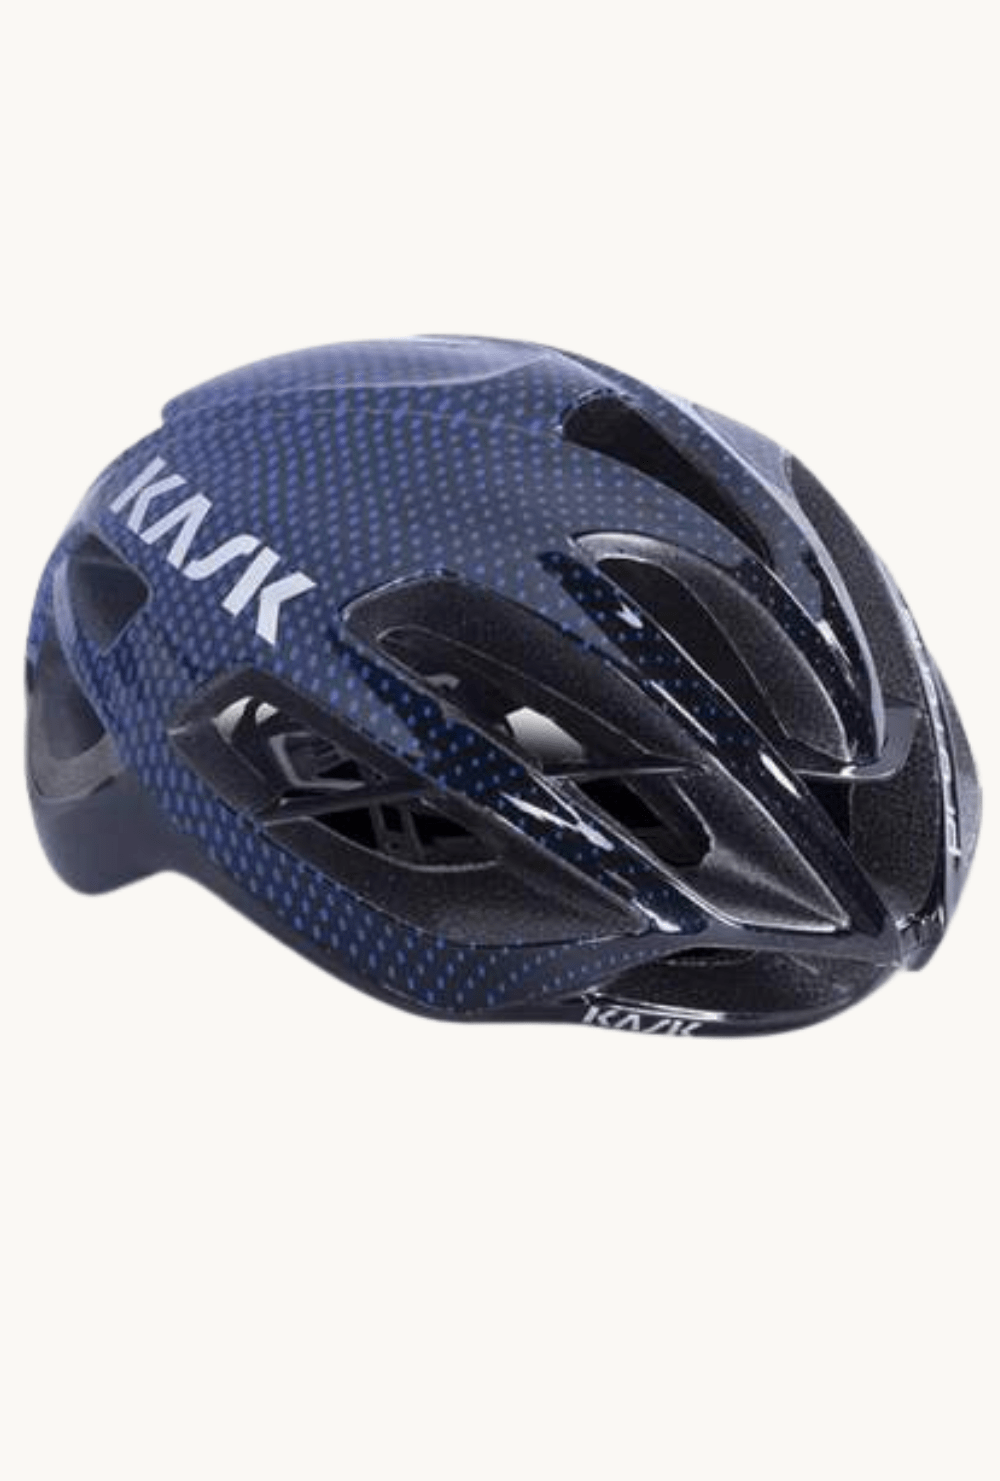 Helmet - Kask Protone Dotted Bluesmall (50-56cm) / Dotted Blue